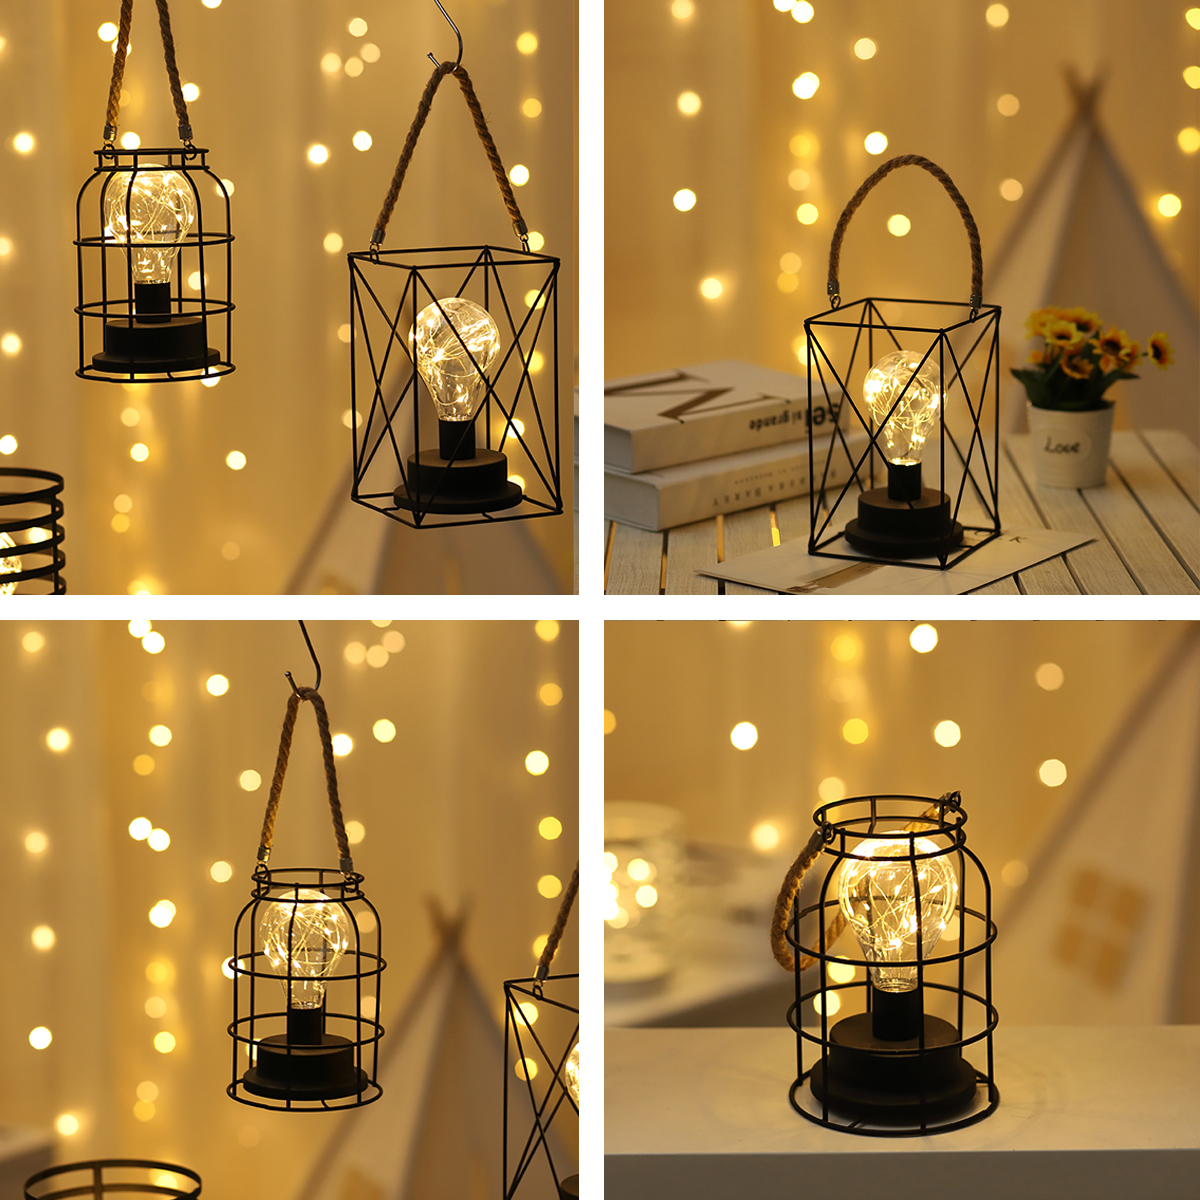 Retro-Cage-Light-Mini-Metal-Battery-Powered-LED-Bulb-Lamp-for-Living-Room-Bedroom-Kitchen-Wedding-Ch-1733946-8